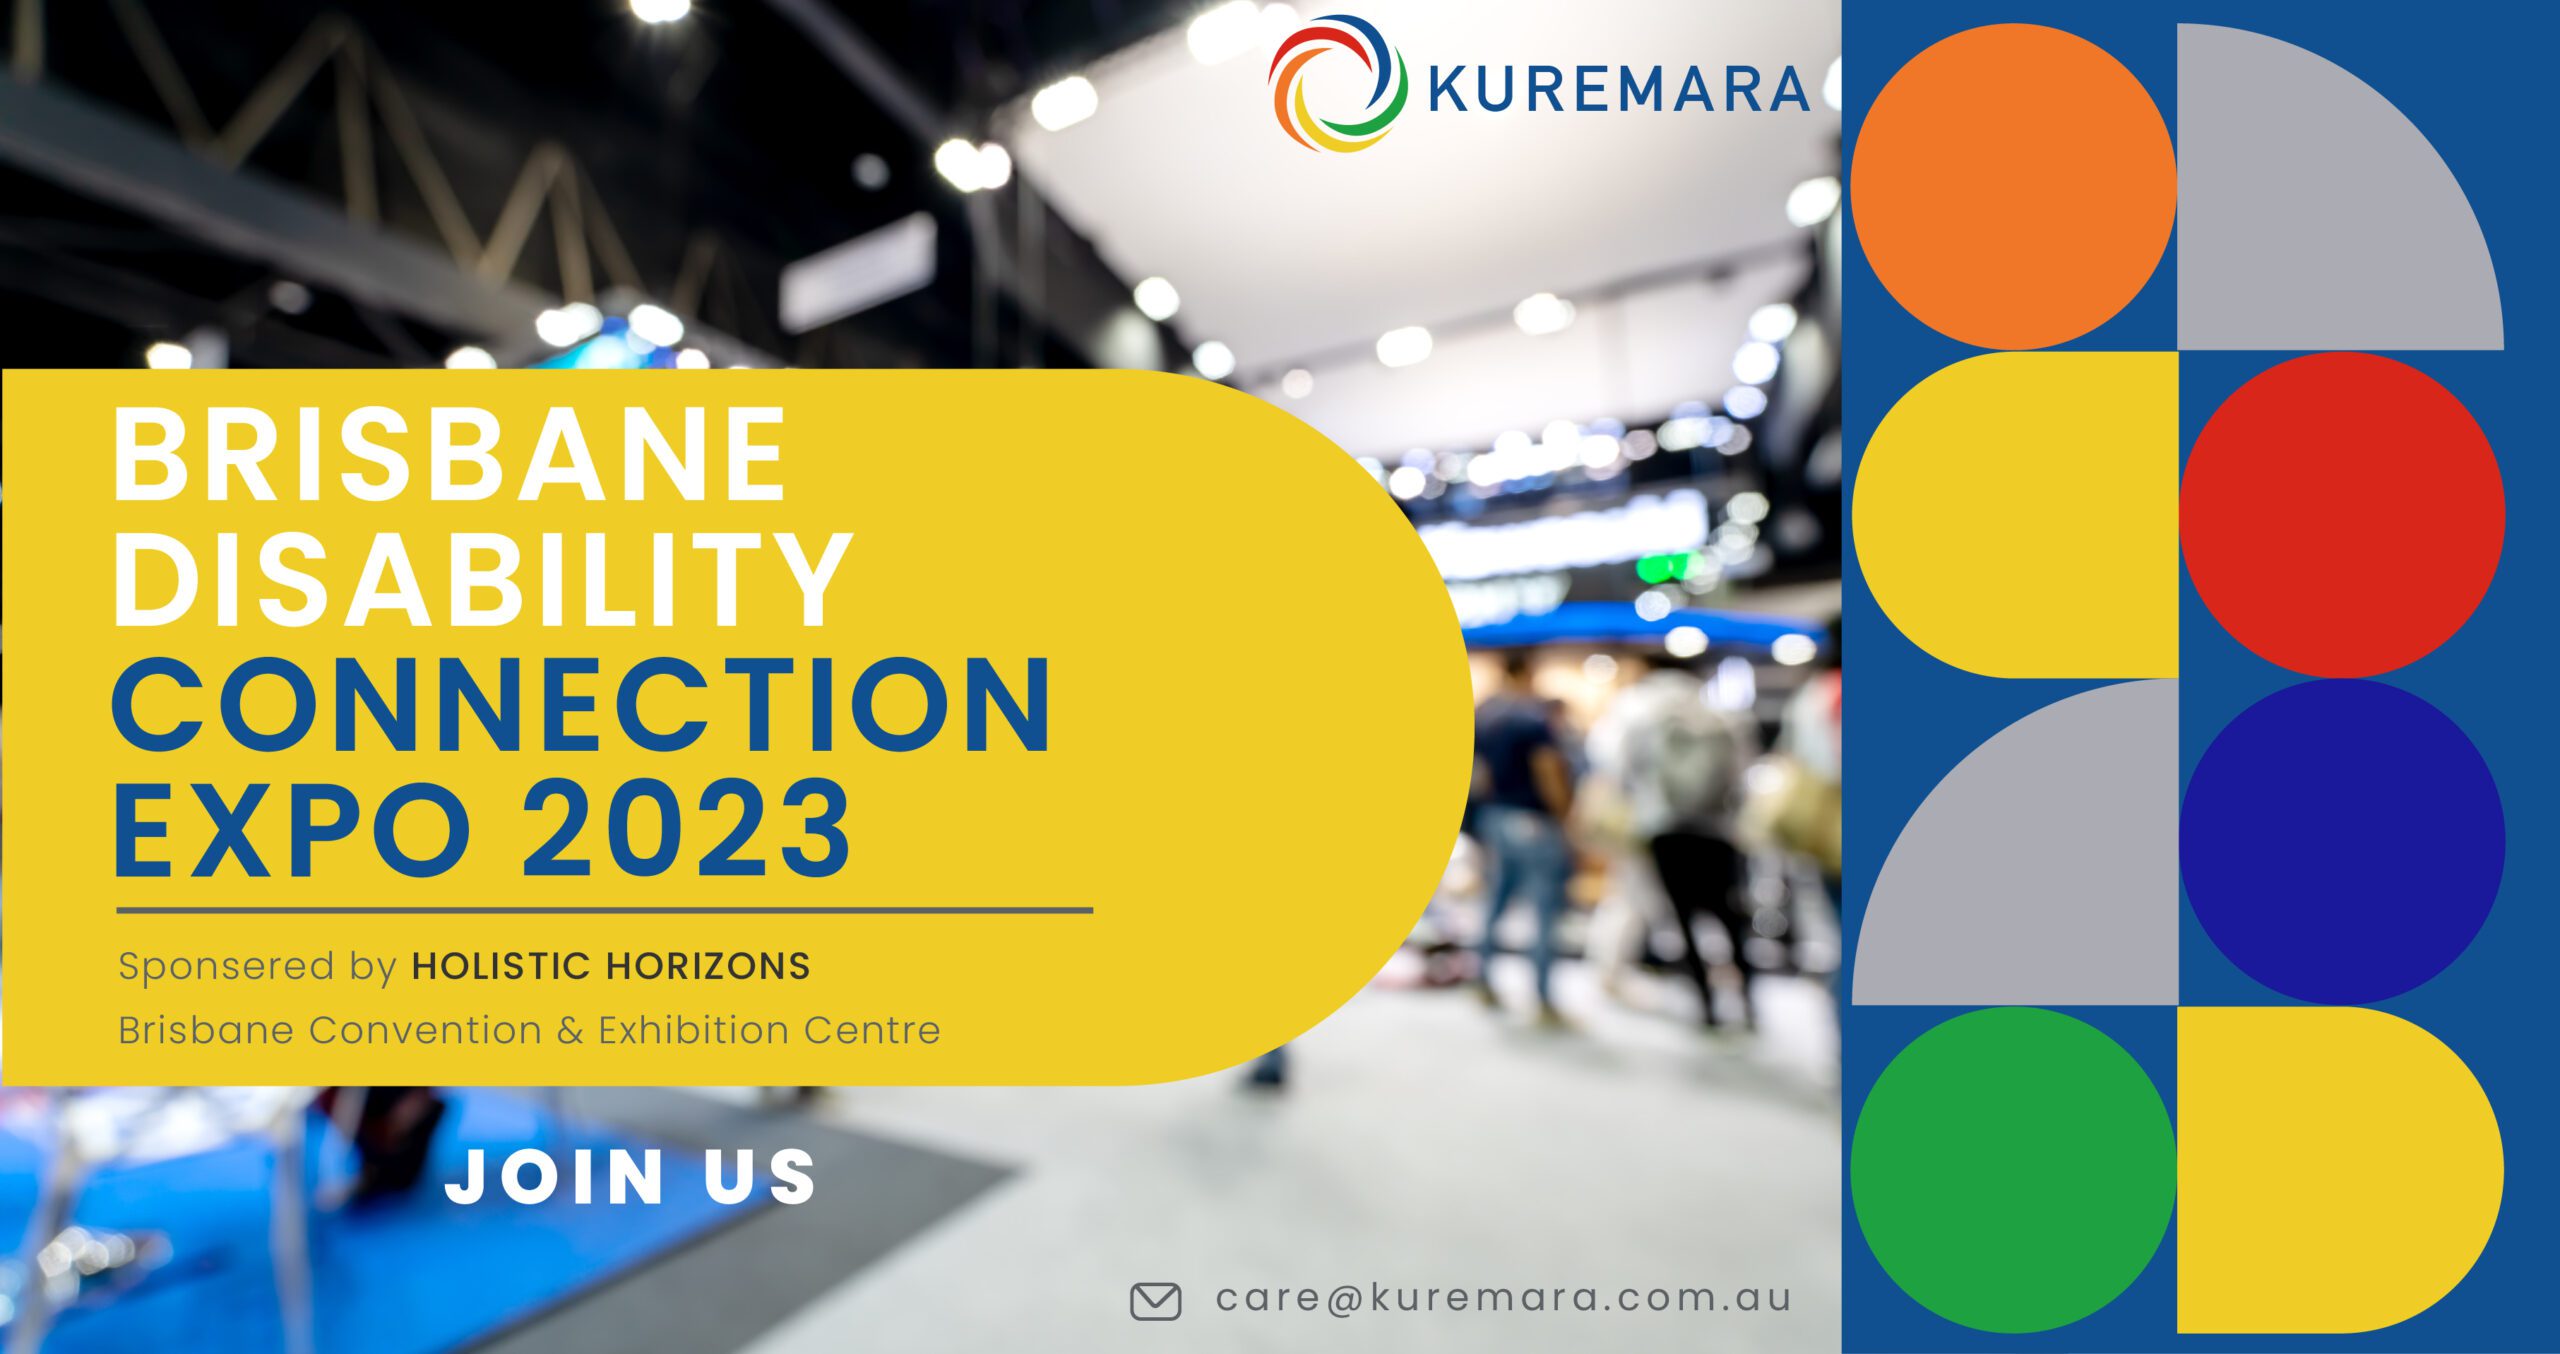 Brisbane Disability Connection Expo 2023